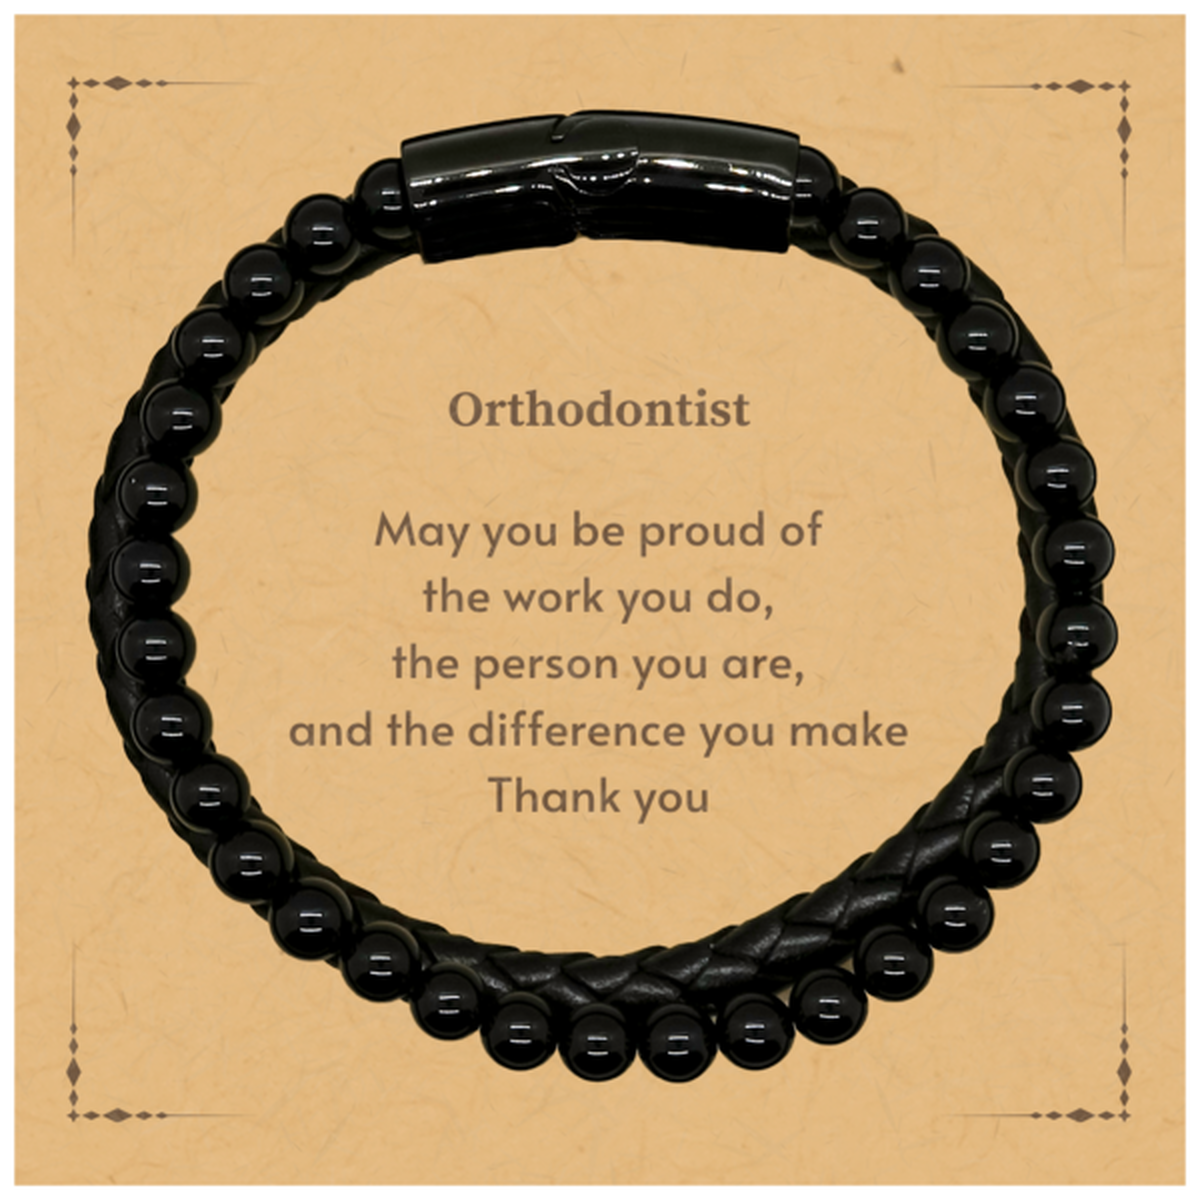 Heartwarming Stone Leather Bracelets Retirement Coworkers Gifts for Orthodontist, Orthodontist May You be proud of the work you do, the person you are Gifts for Boss Men Women Friends